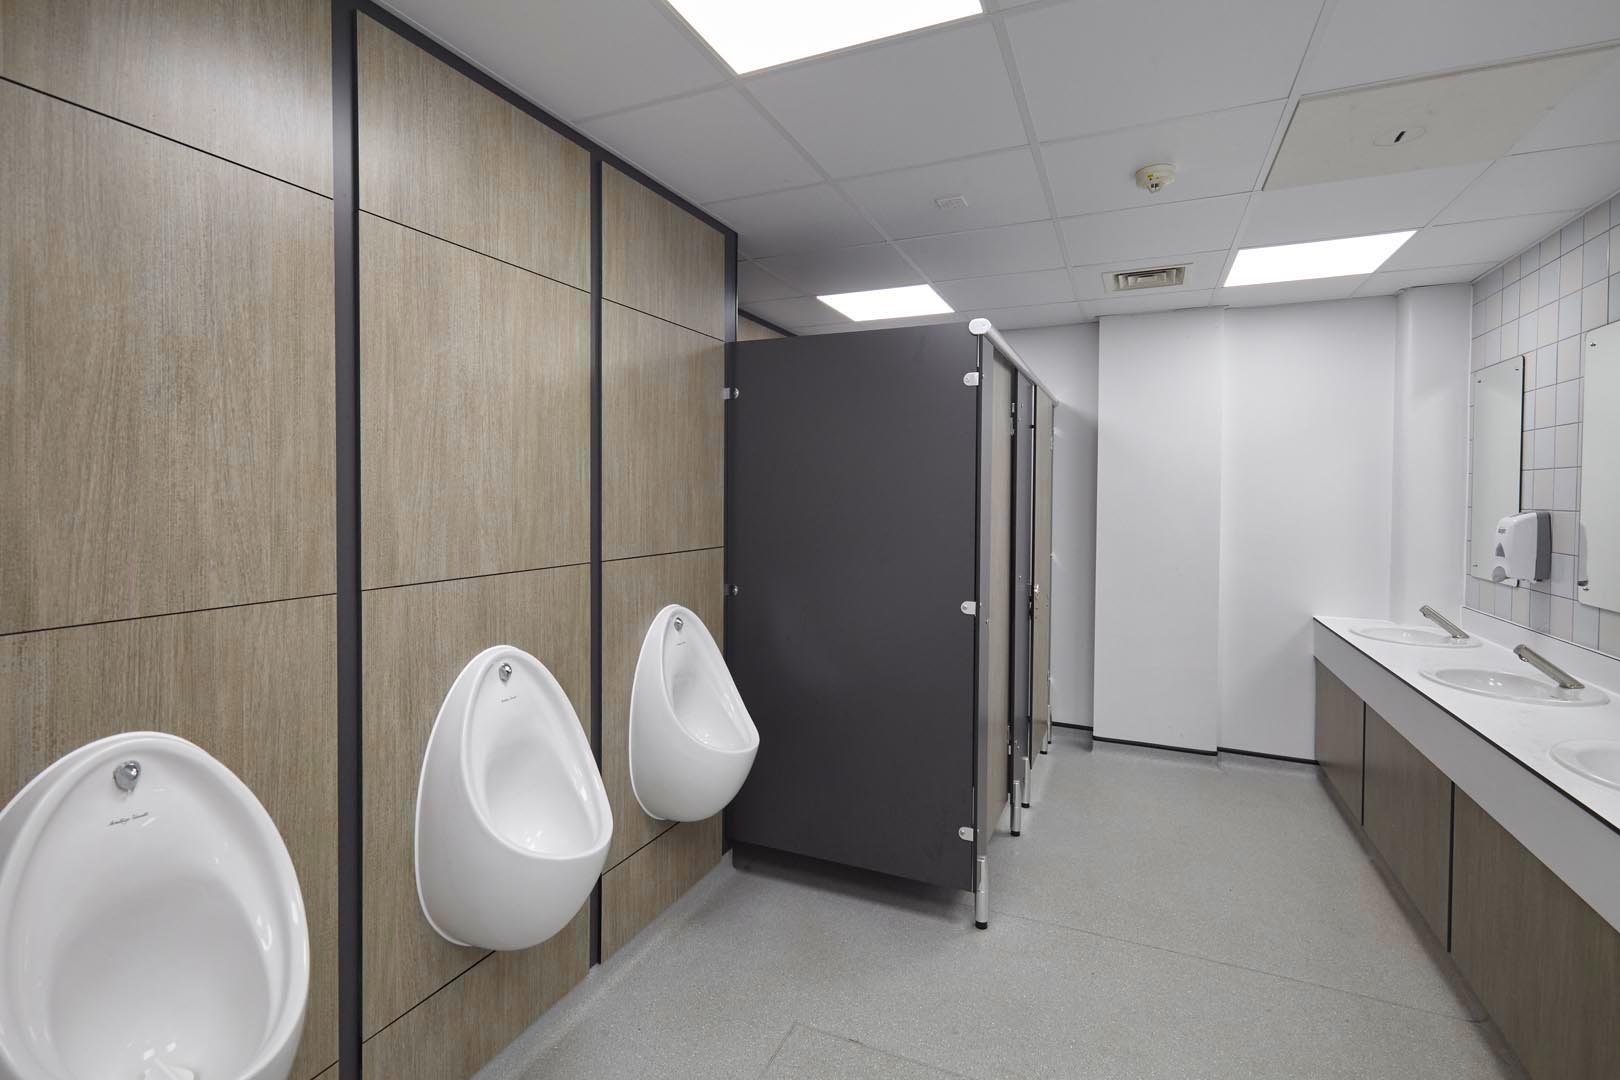 male washroom at leicester college with urinals, cubicles and a vanity unit hand wash area in woodgrain and grey at leicester college.jpg